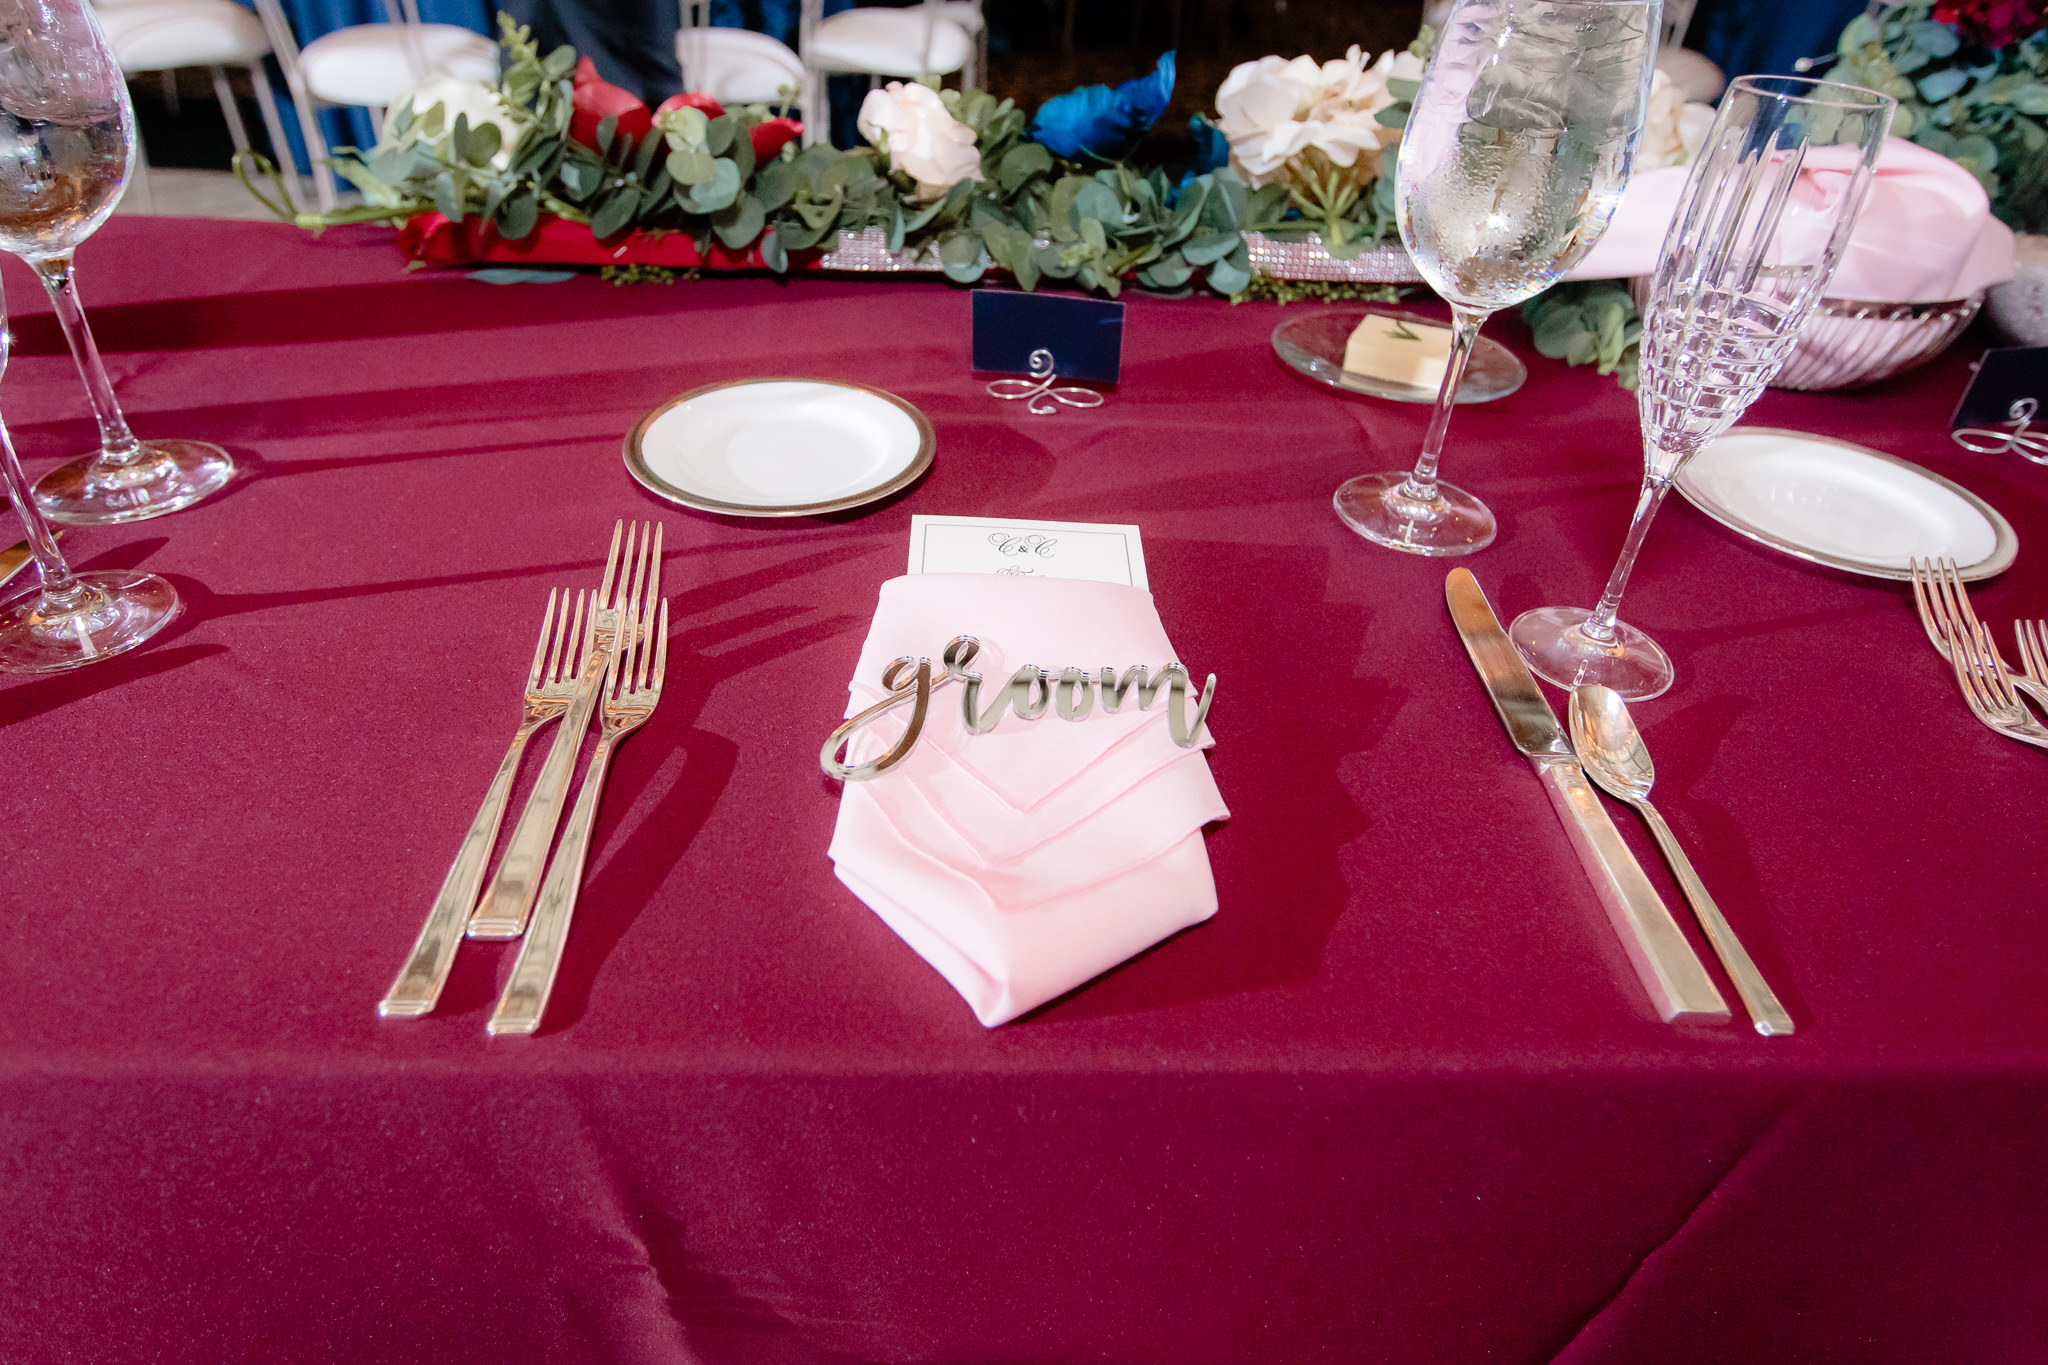 The groom's placesetting with gold silverware atop a maroon table cloth at the Pennsylvanian